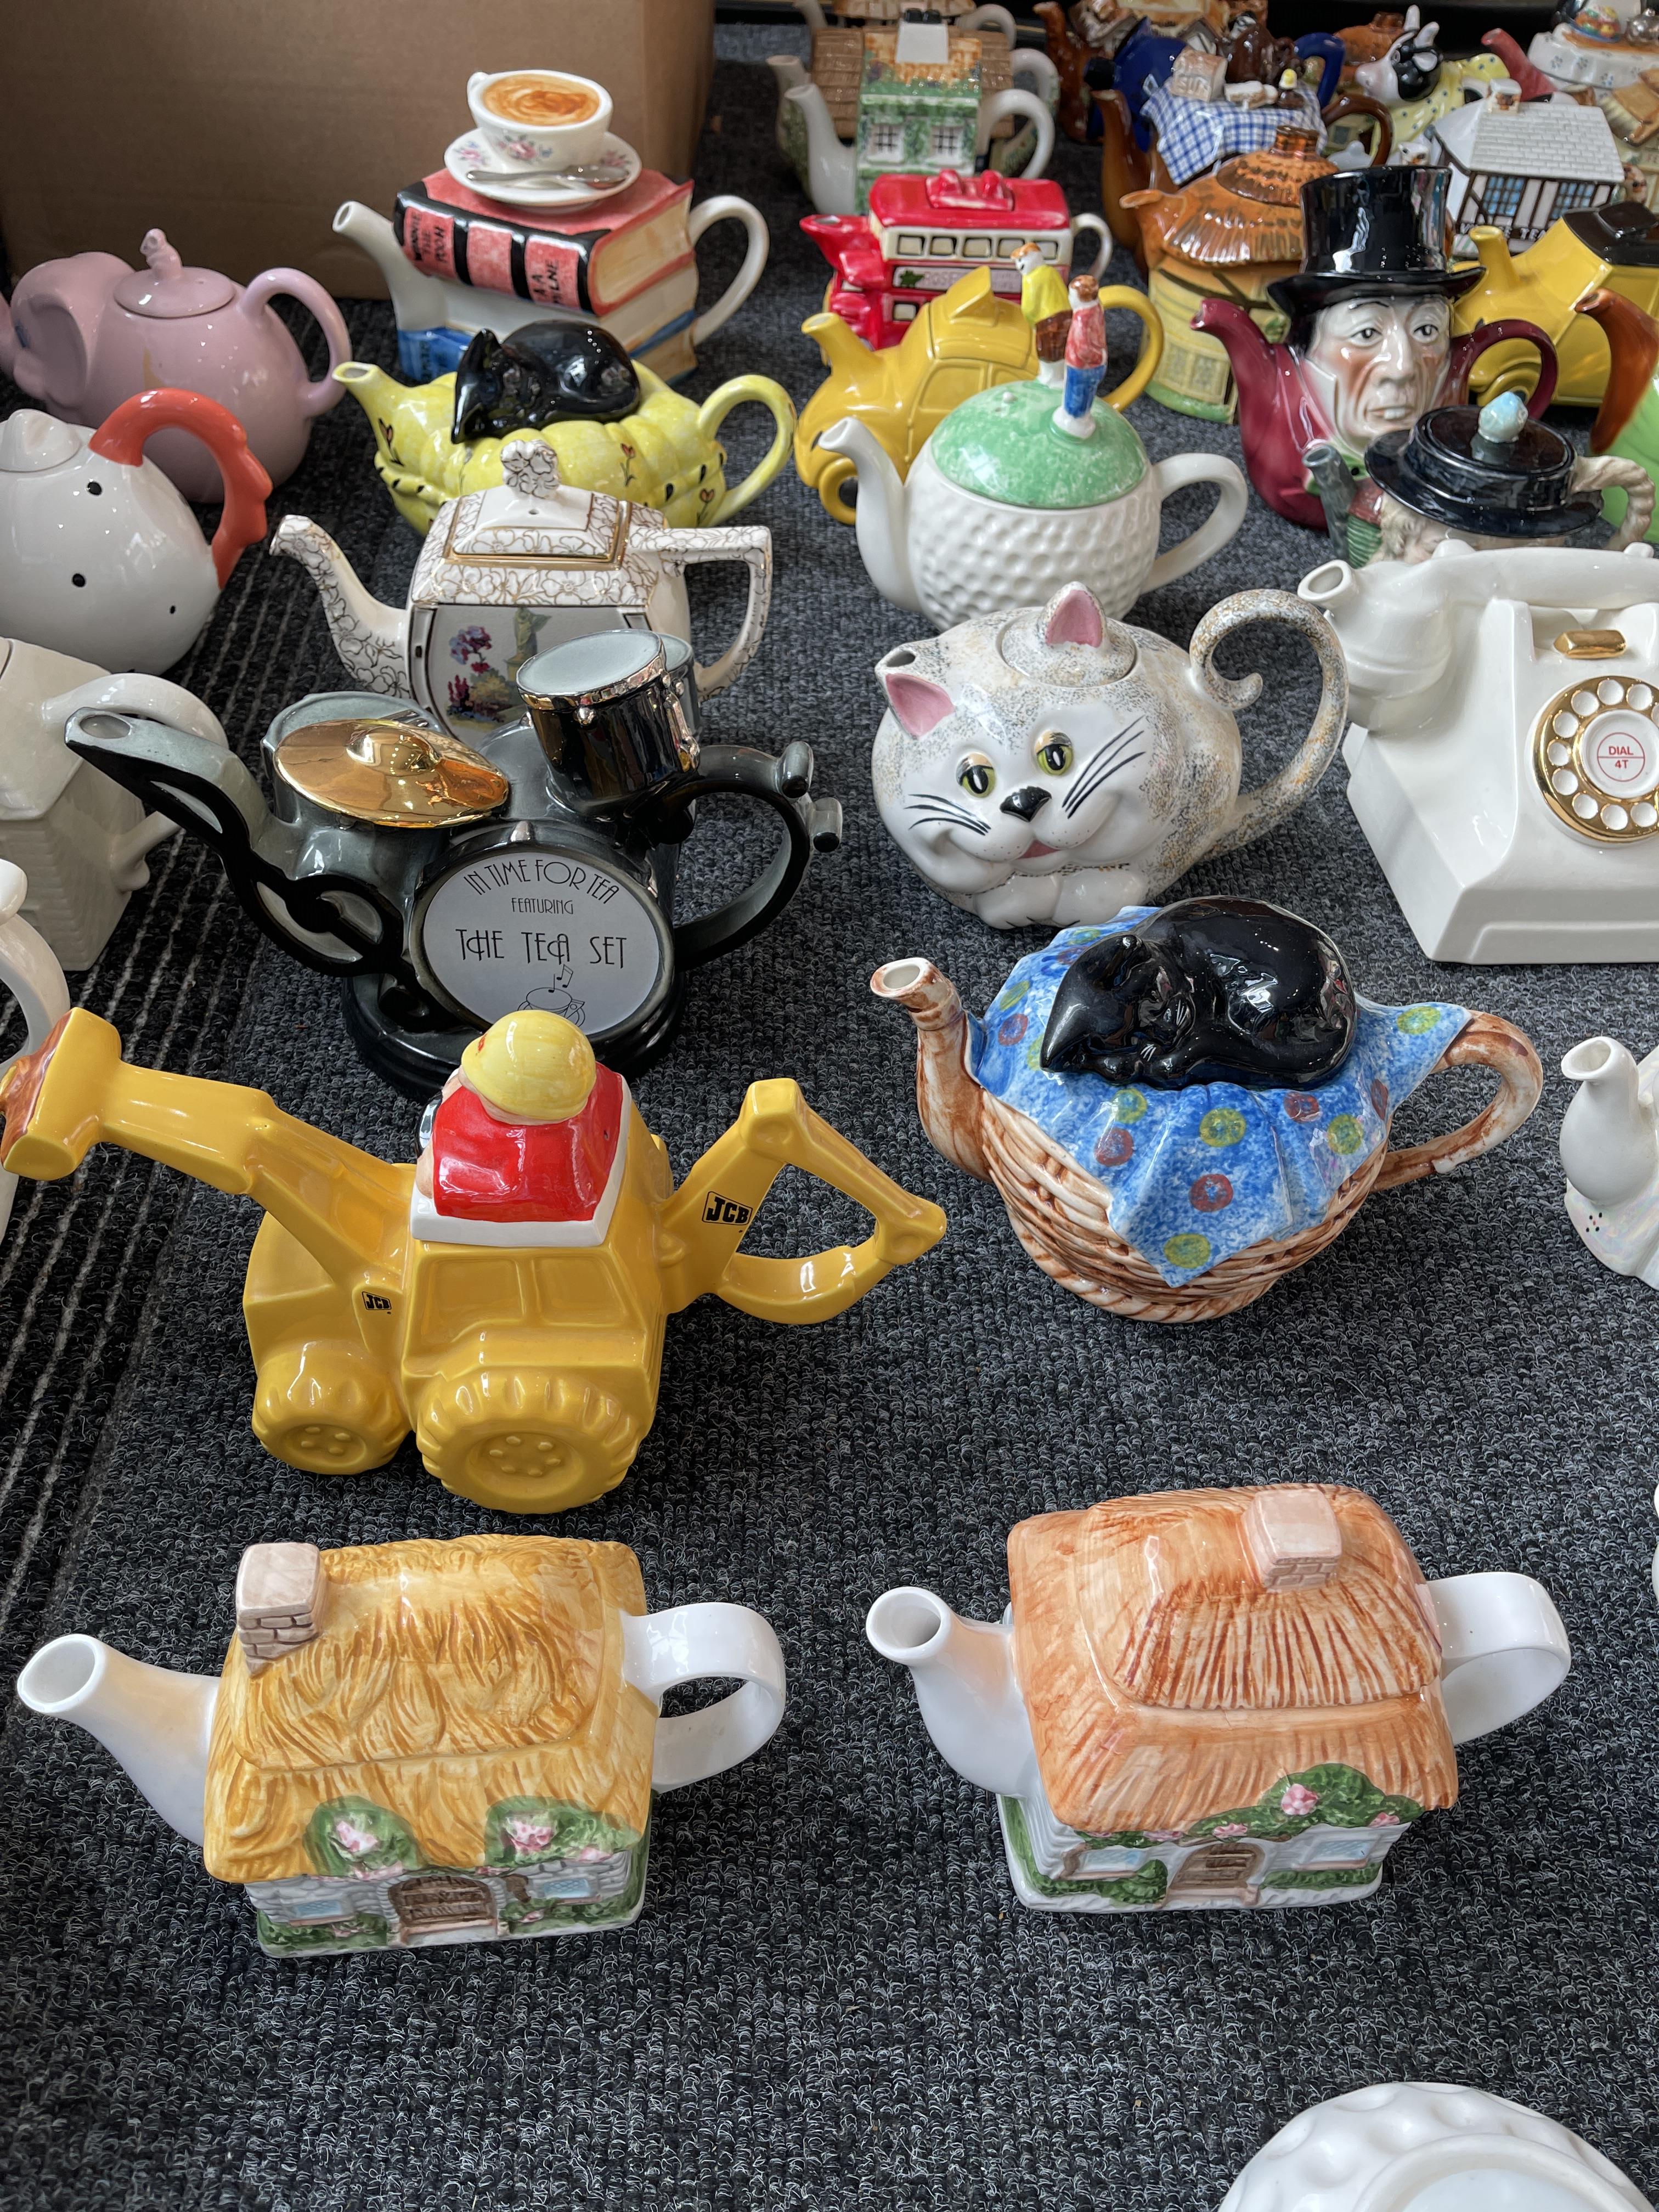 Collection of Ceramic Tea Pots - Image 23 of 44